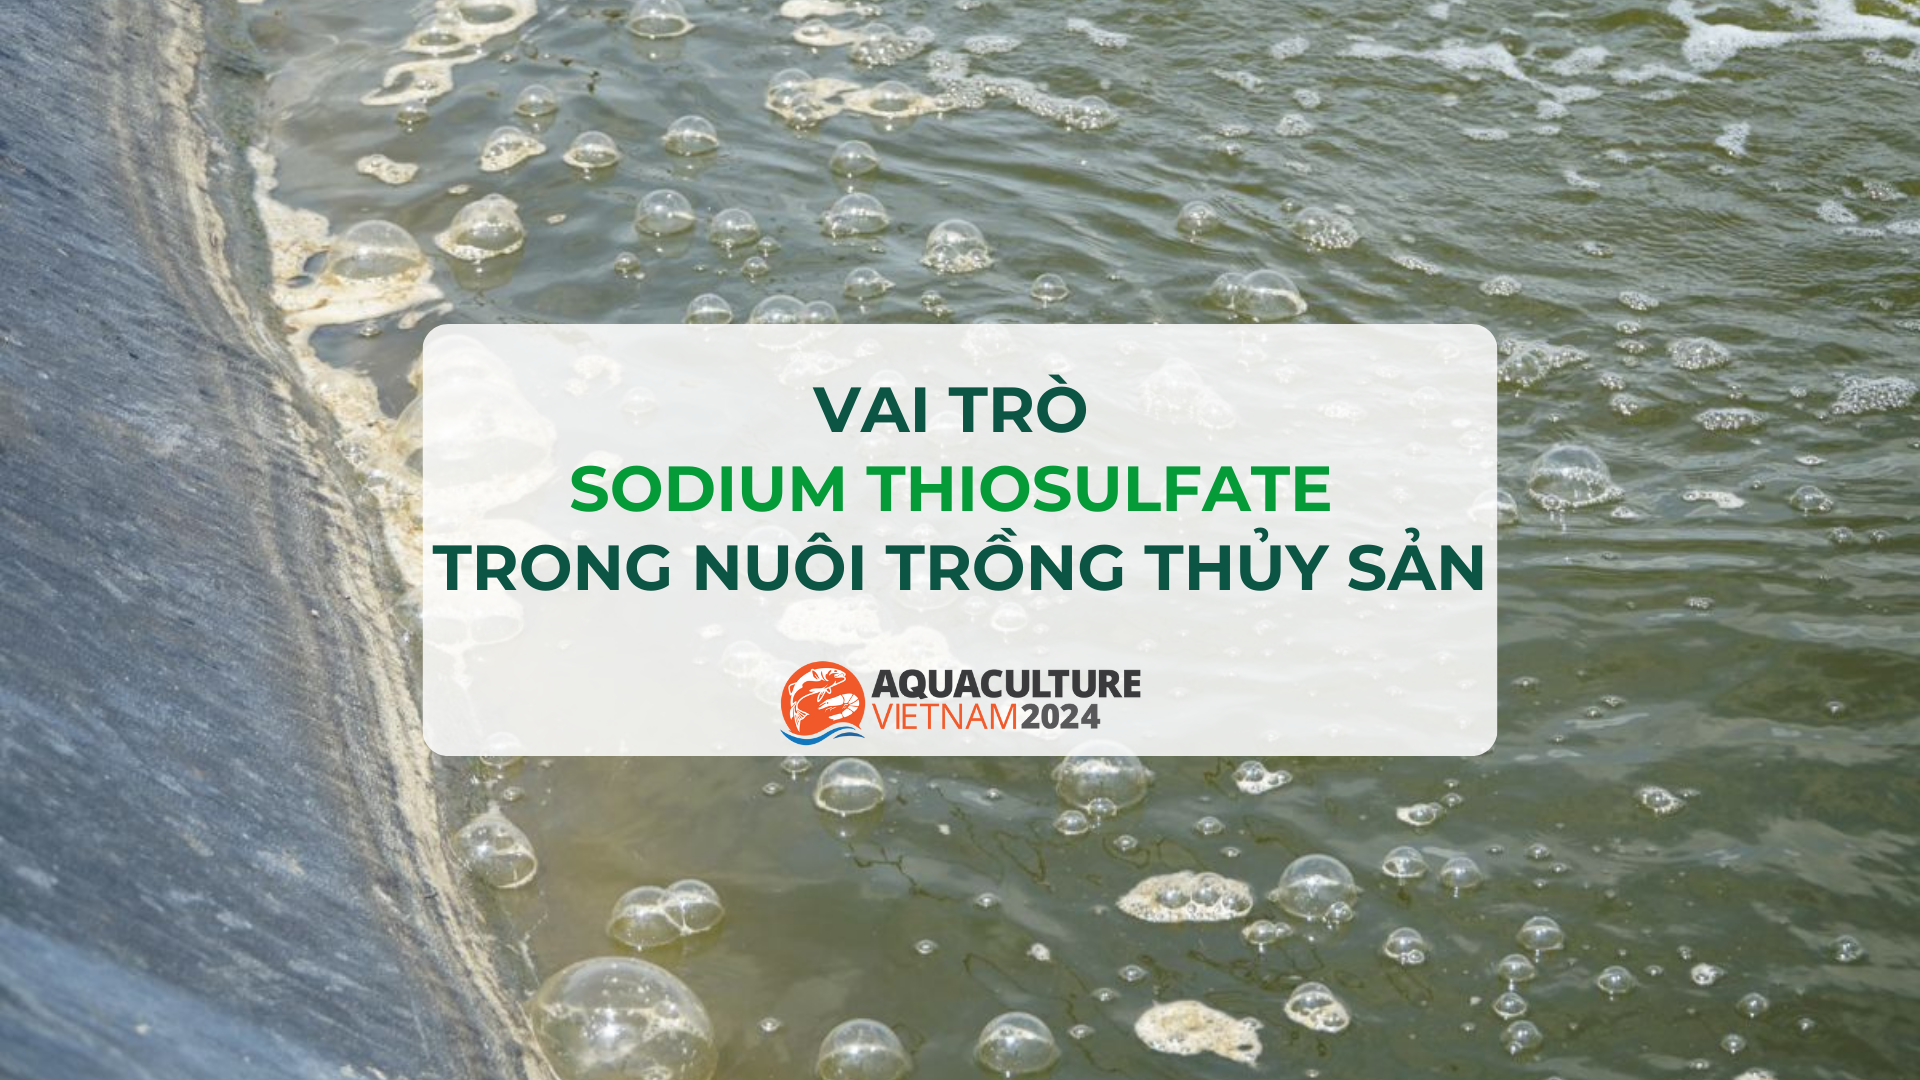 sodium thiosulfate trong nuoi trong thuy san 1